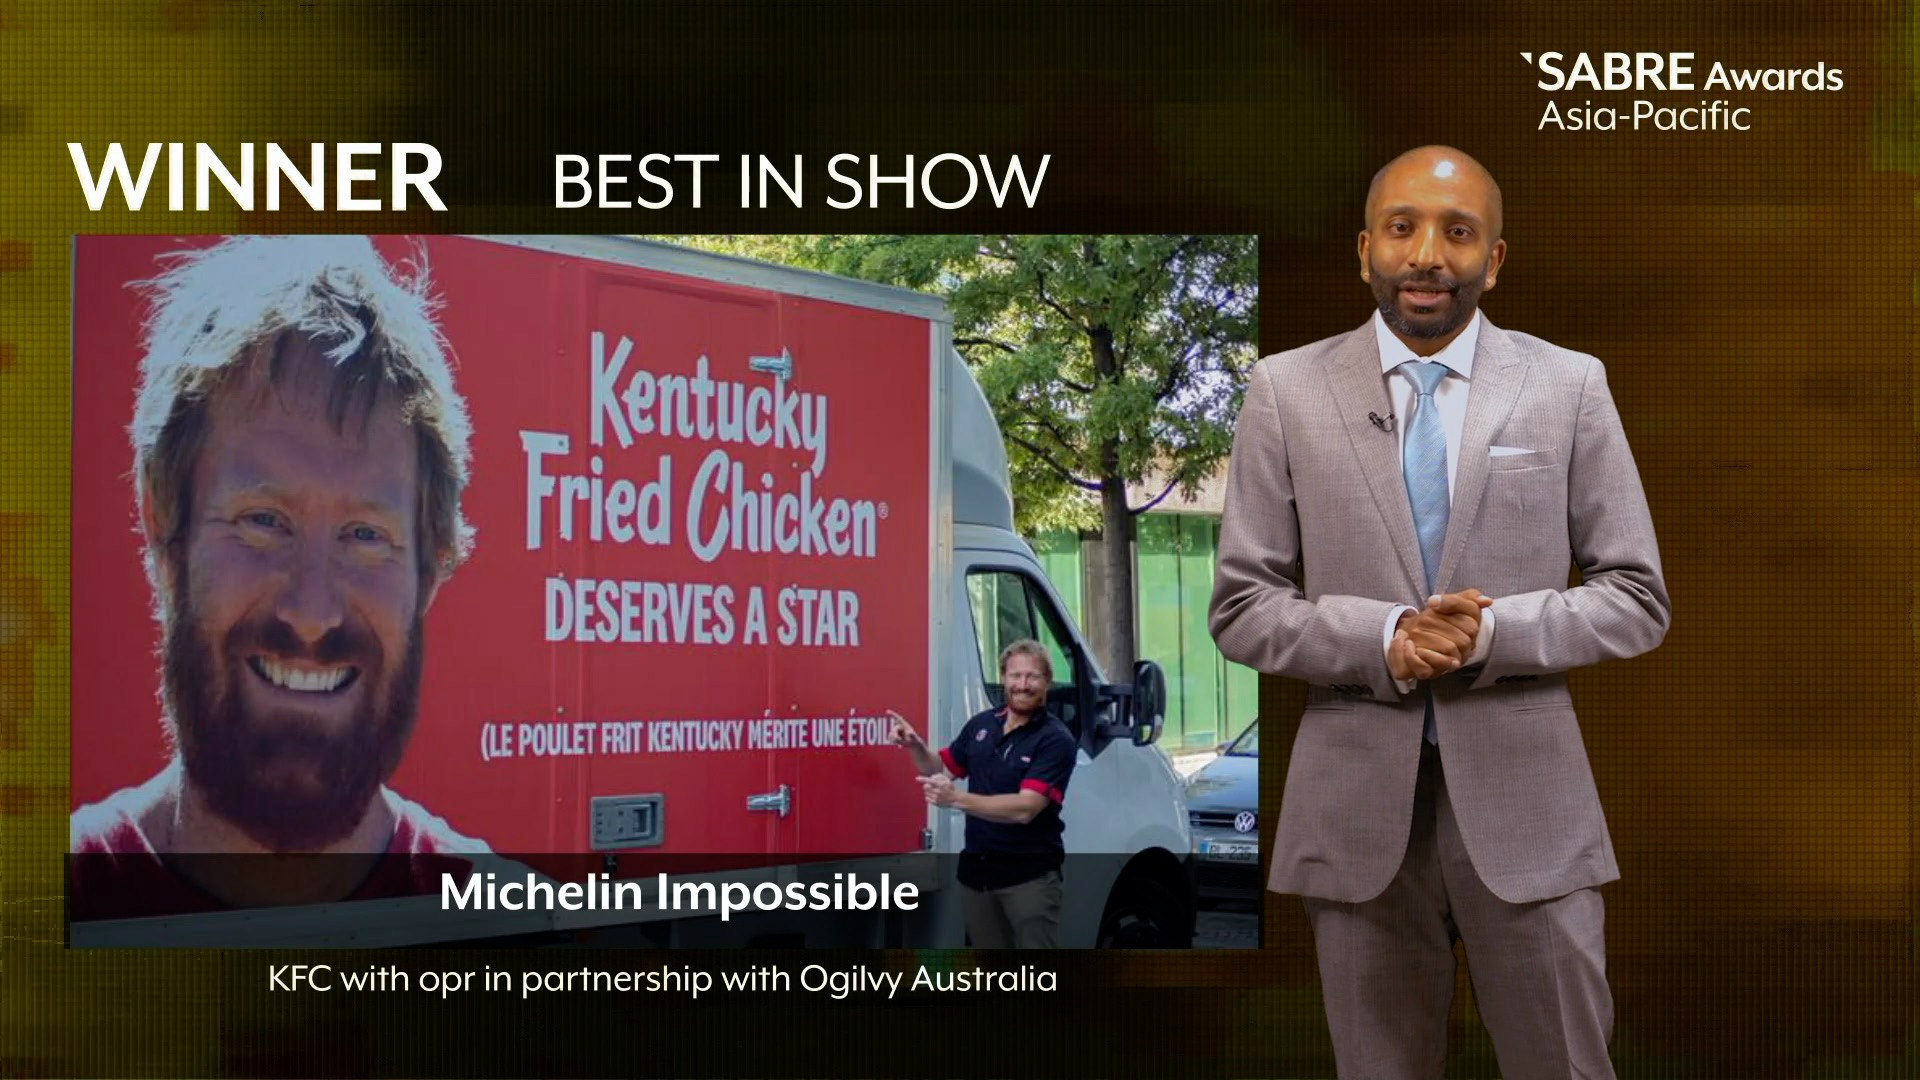 KFC & Ogilvy's 'Michelin Impossible' Wins Best In Show At 2020 Asia-Pacific SABRE Awards